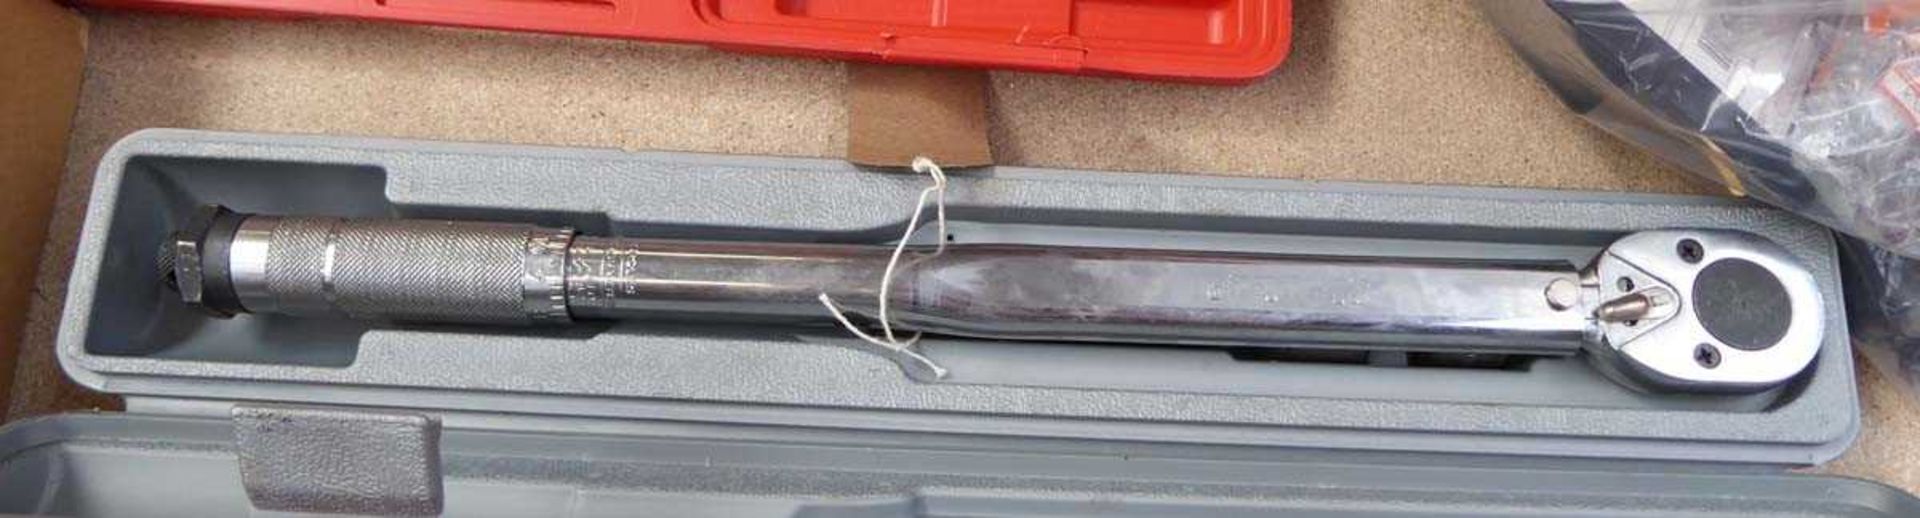 Cased Clarke drive torque wrench - Image 2 of 2